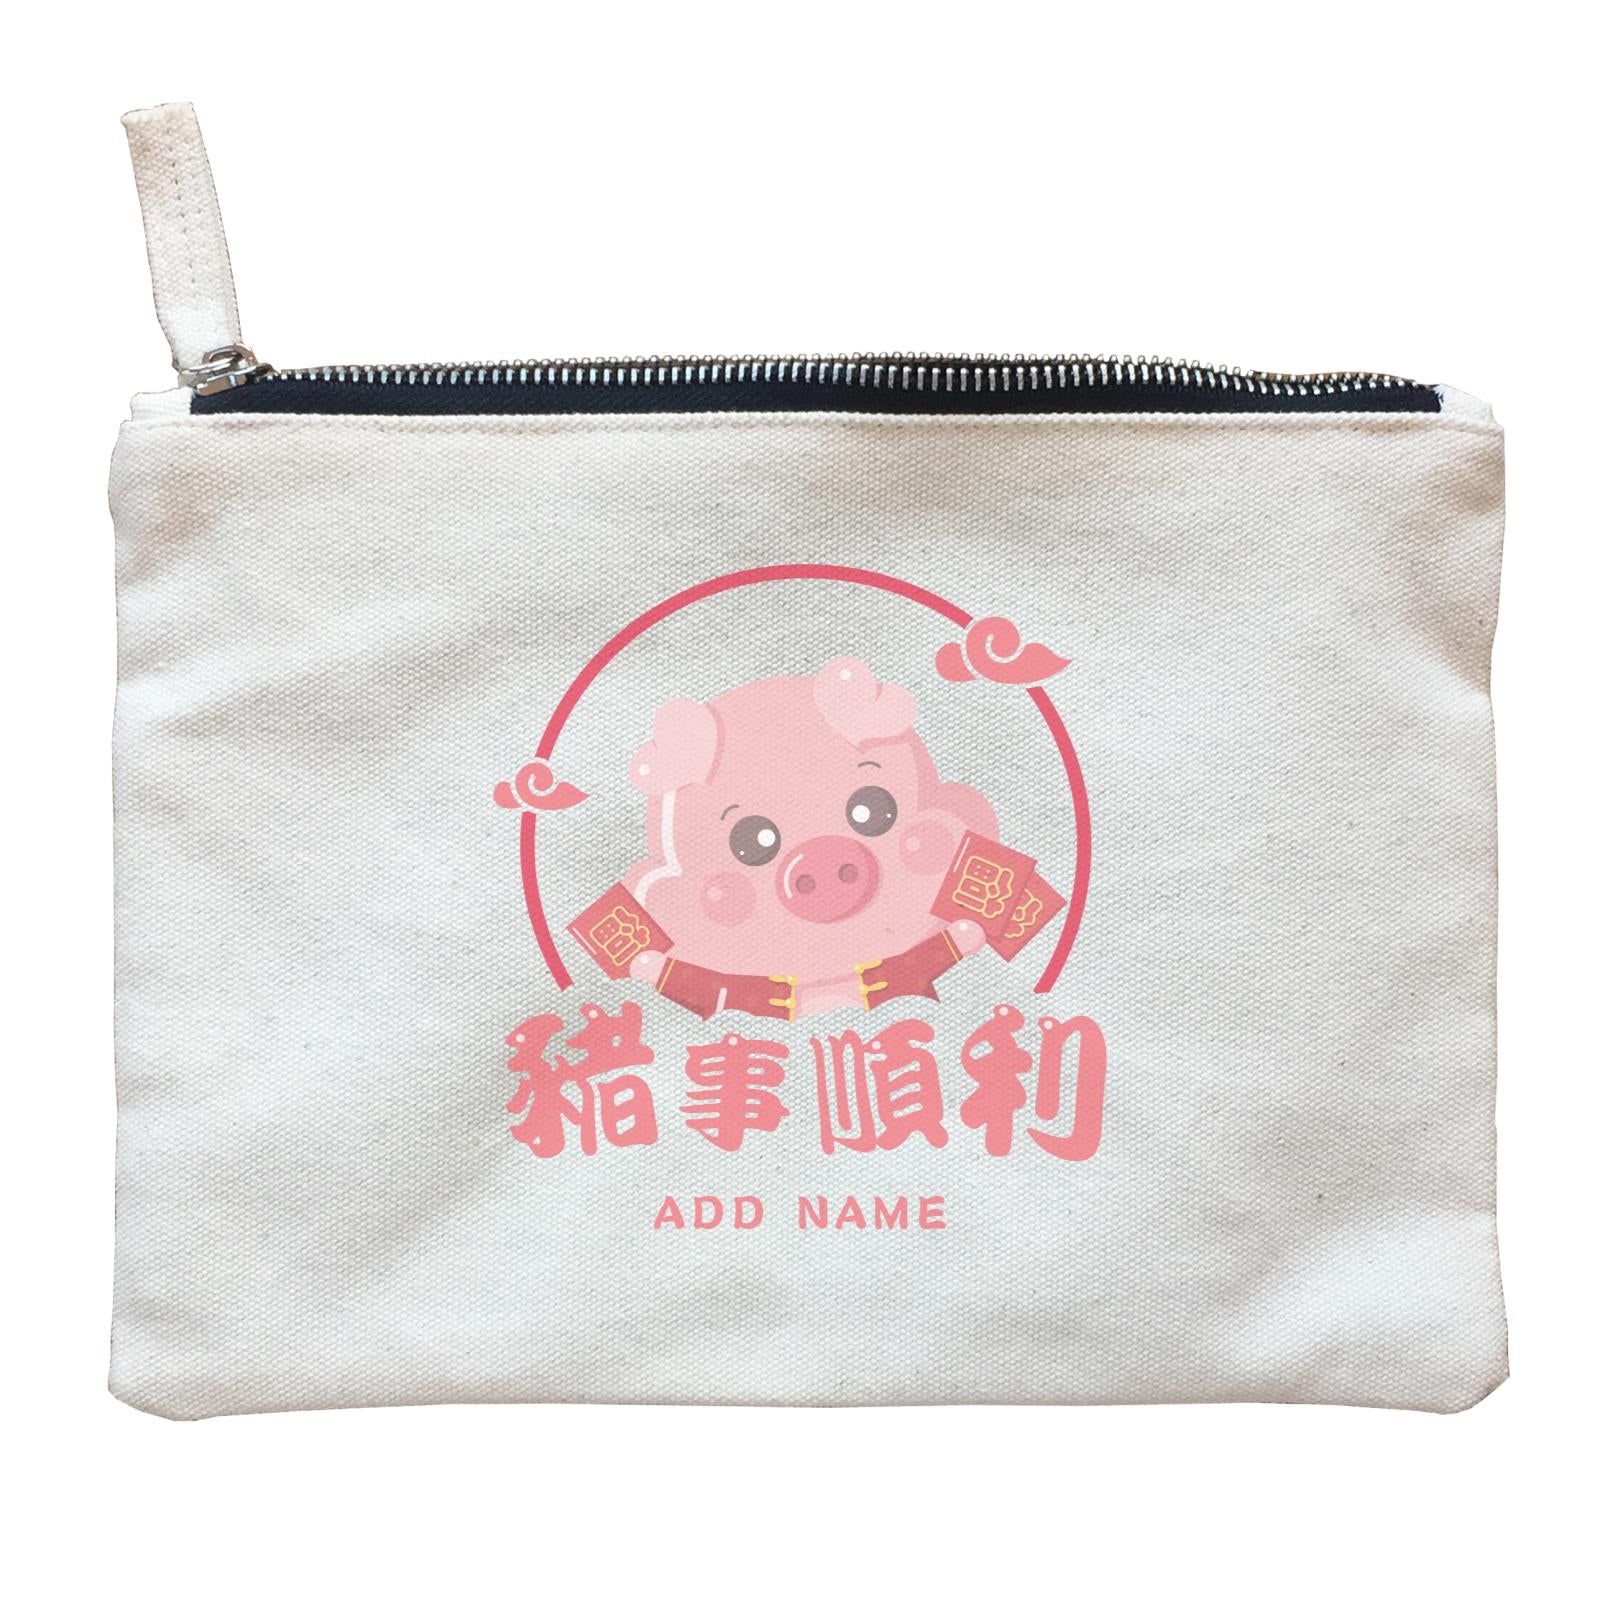 Chinese New Year Cute Pig Emblem Boy Accessories With Addname Zipper Pouch